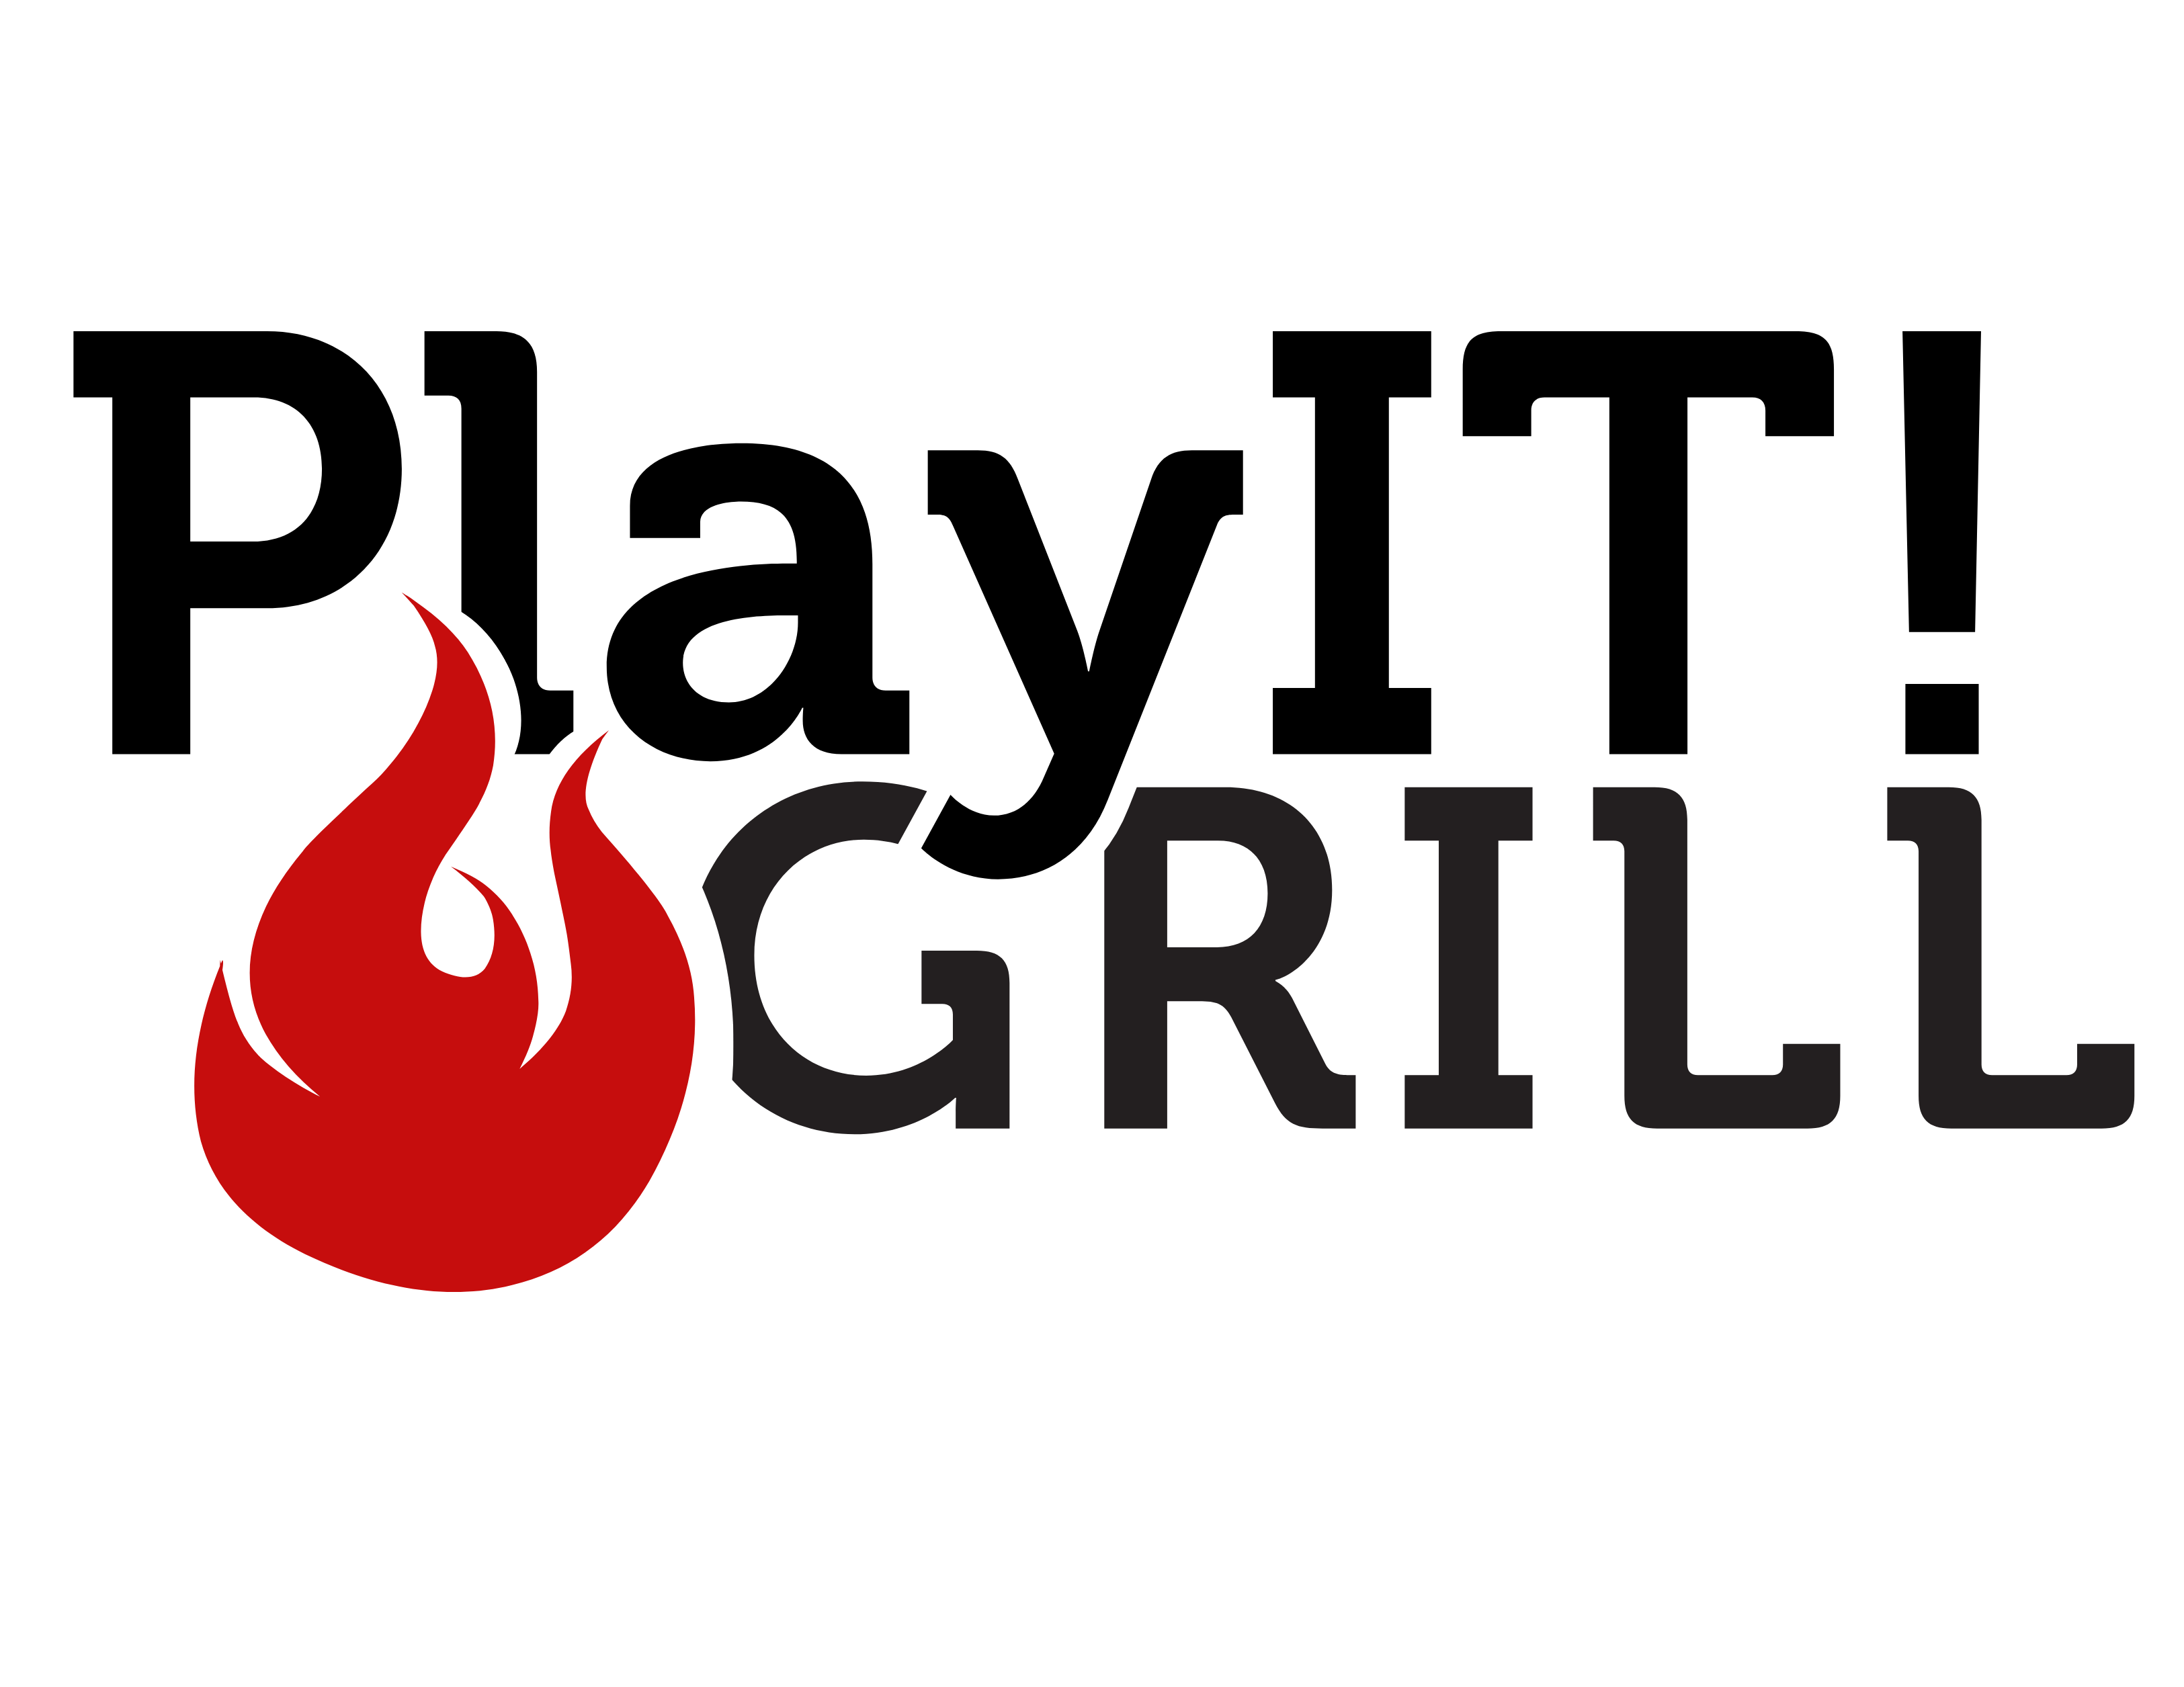 PlayIT! Grill